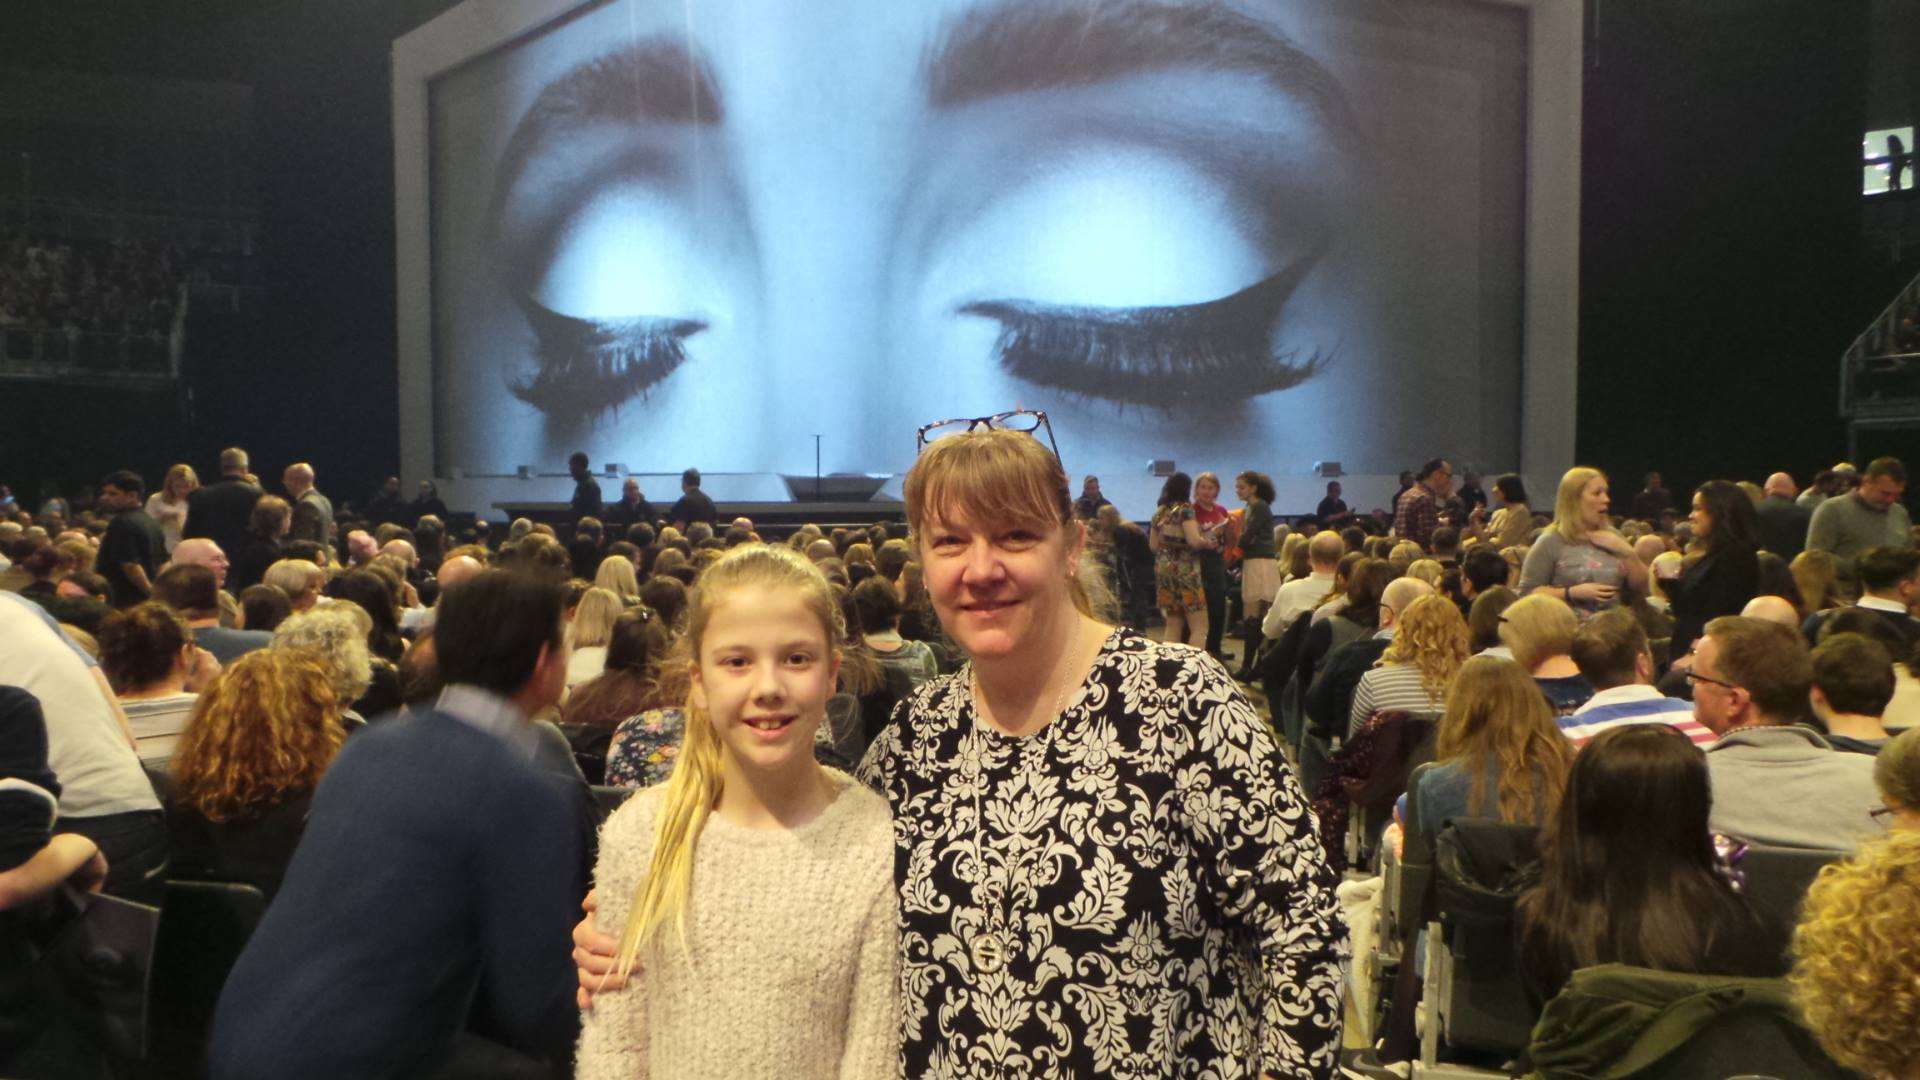 Jasmine with her mother Donna before the concert started